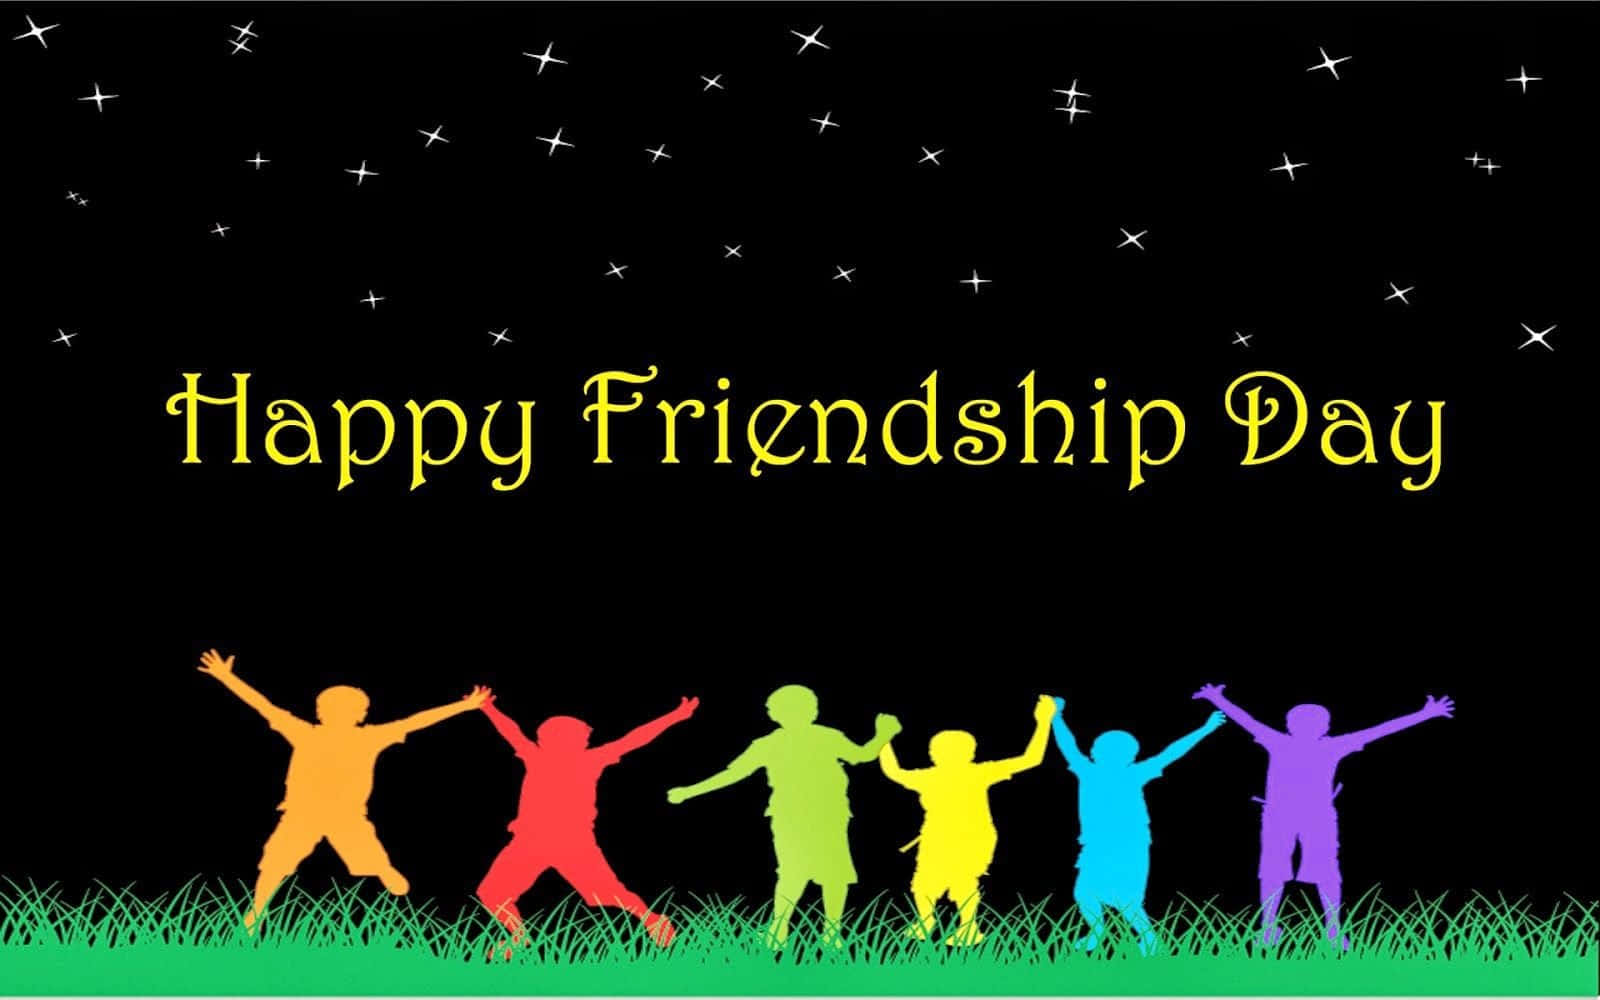 Friendship Day 2015 New Latest HD Wallpaper Images Download   wwwlovelyheartin